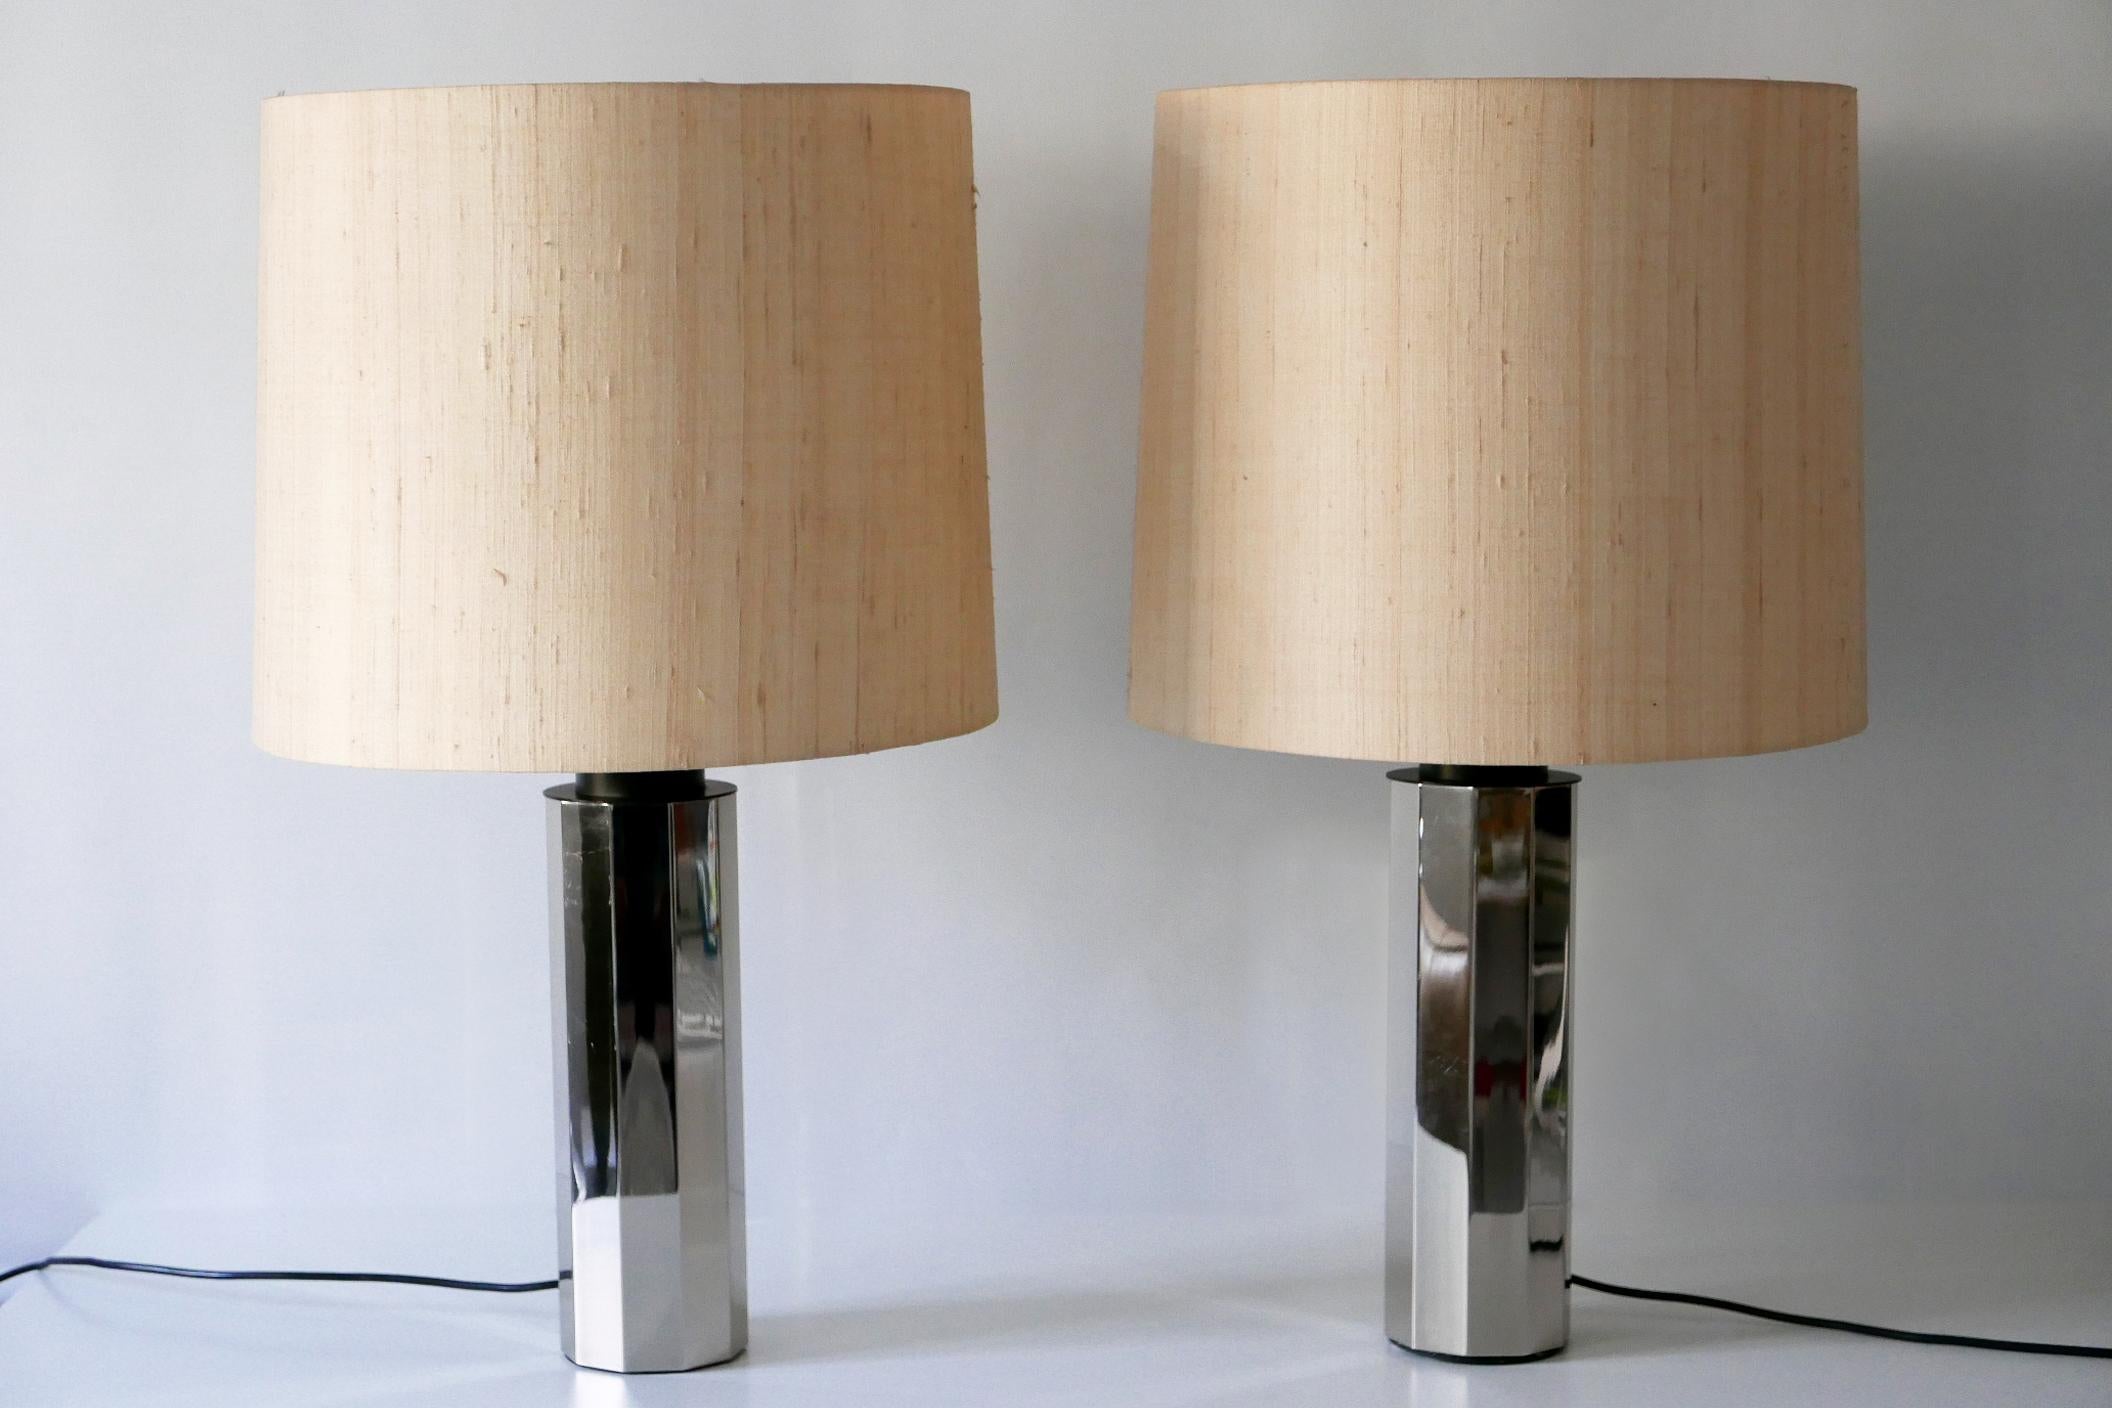 Set of Two Huge, 5-Flamed Midcentury Decagonal Chrome Table Lamps 1960s, Germany For Sale 4